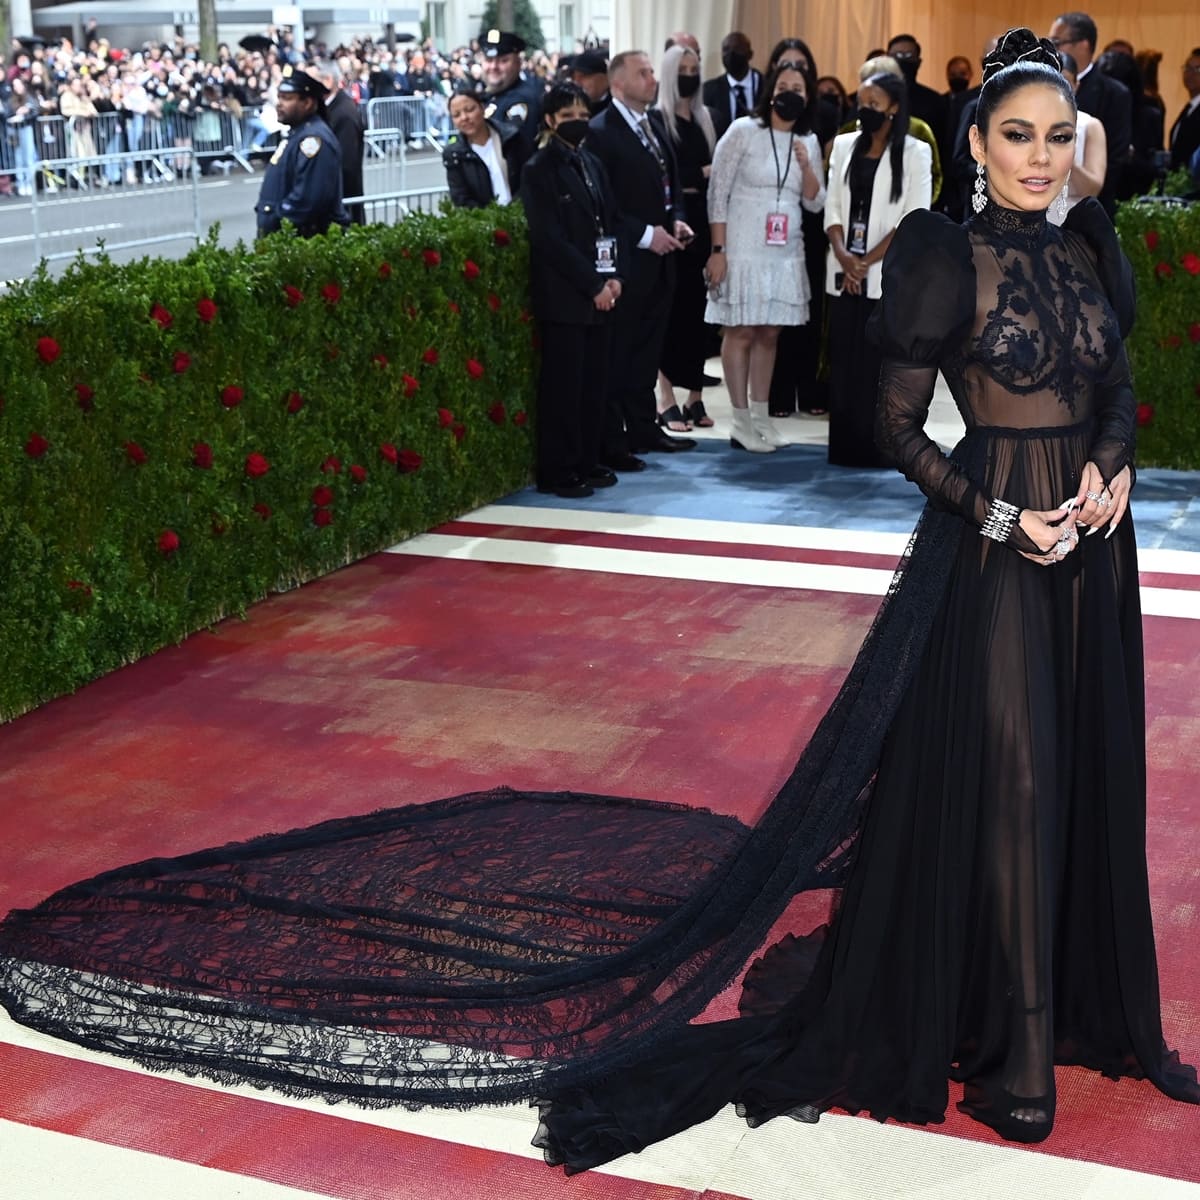 Exuding dark glamour, Vanessa Hudgens caused quite a stir with her sheer black Moschino dress at this year's Met Gala